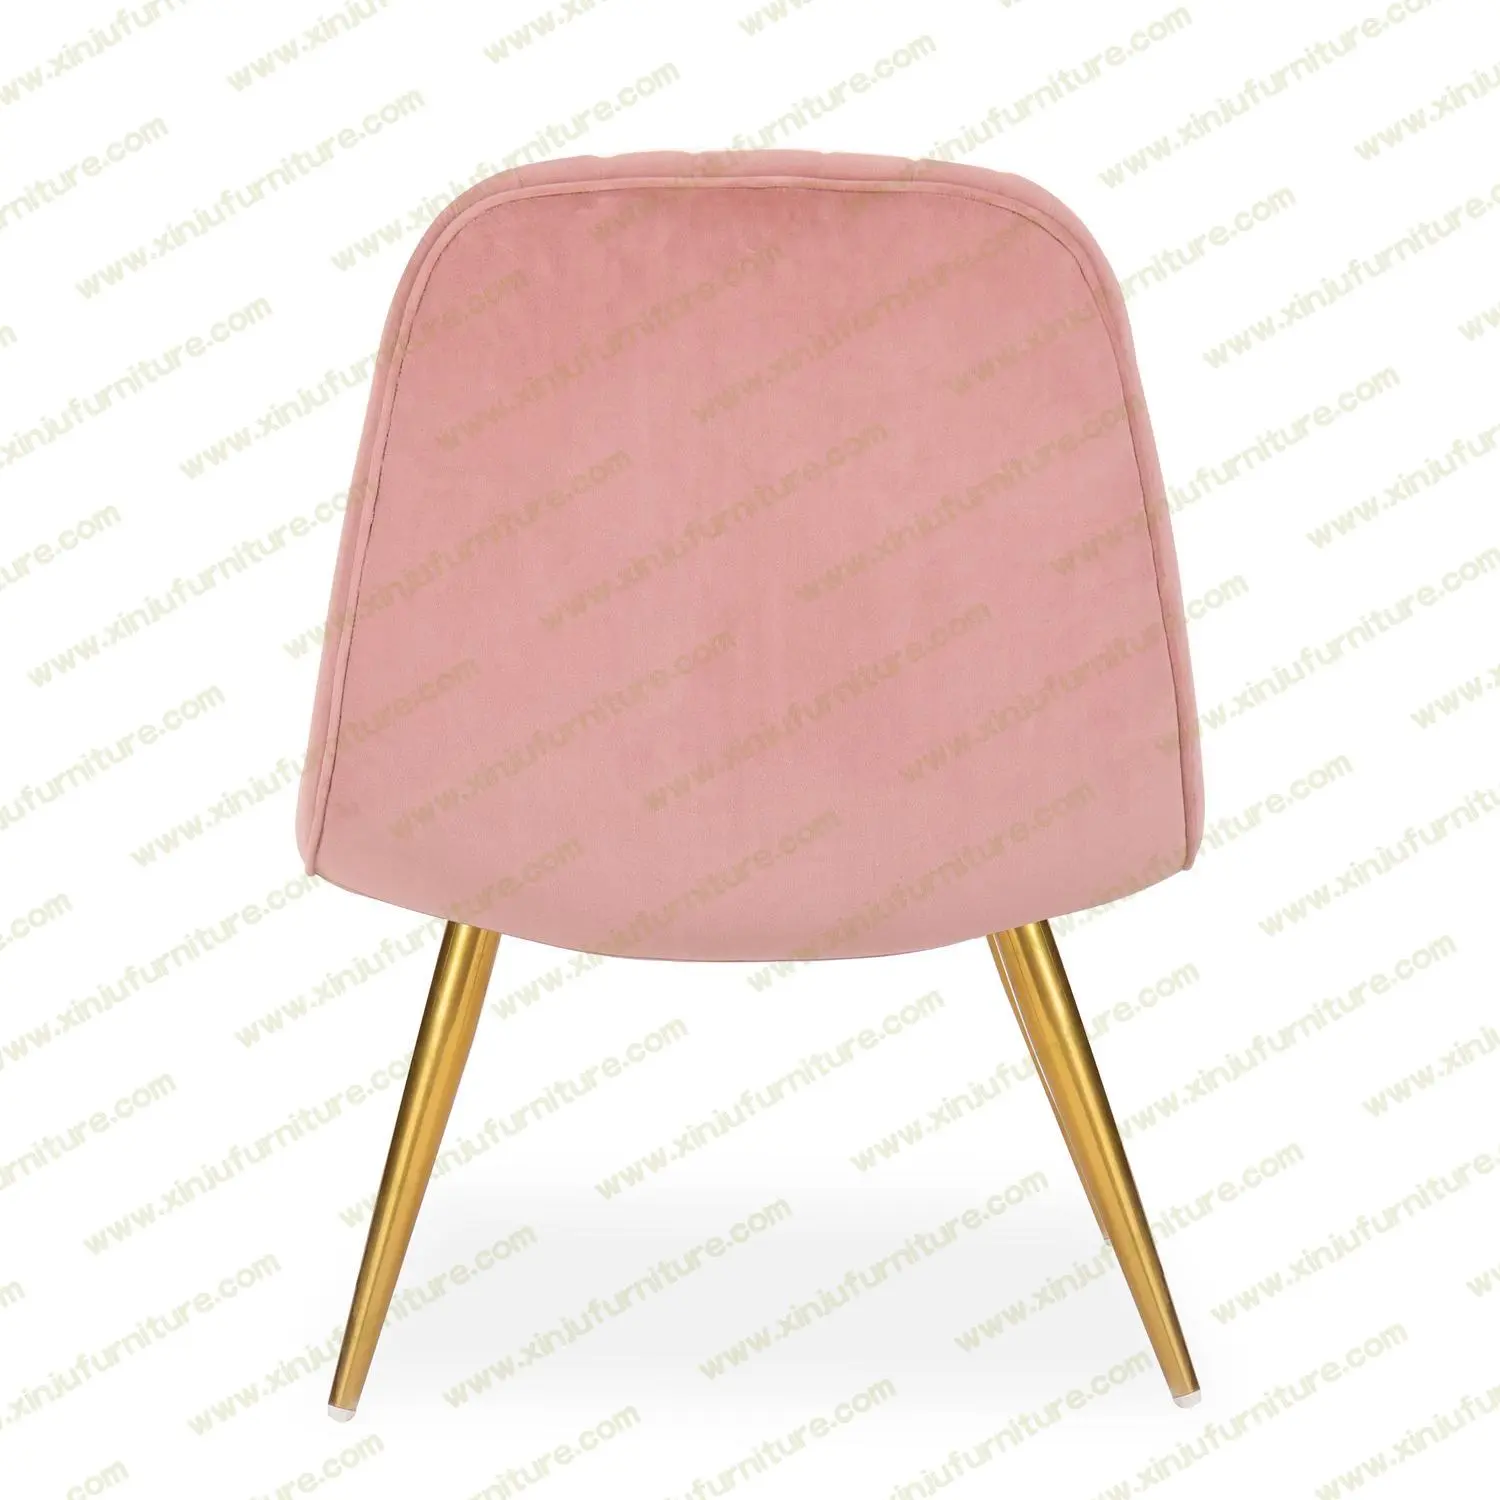 Thickened comfortable pink leisure chair